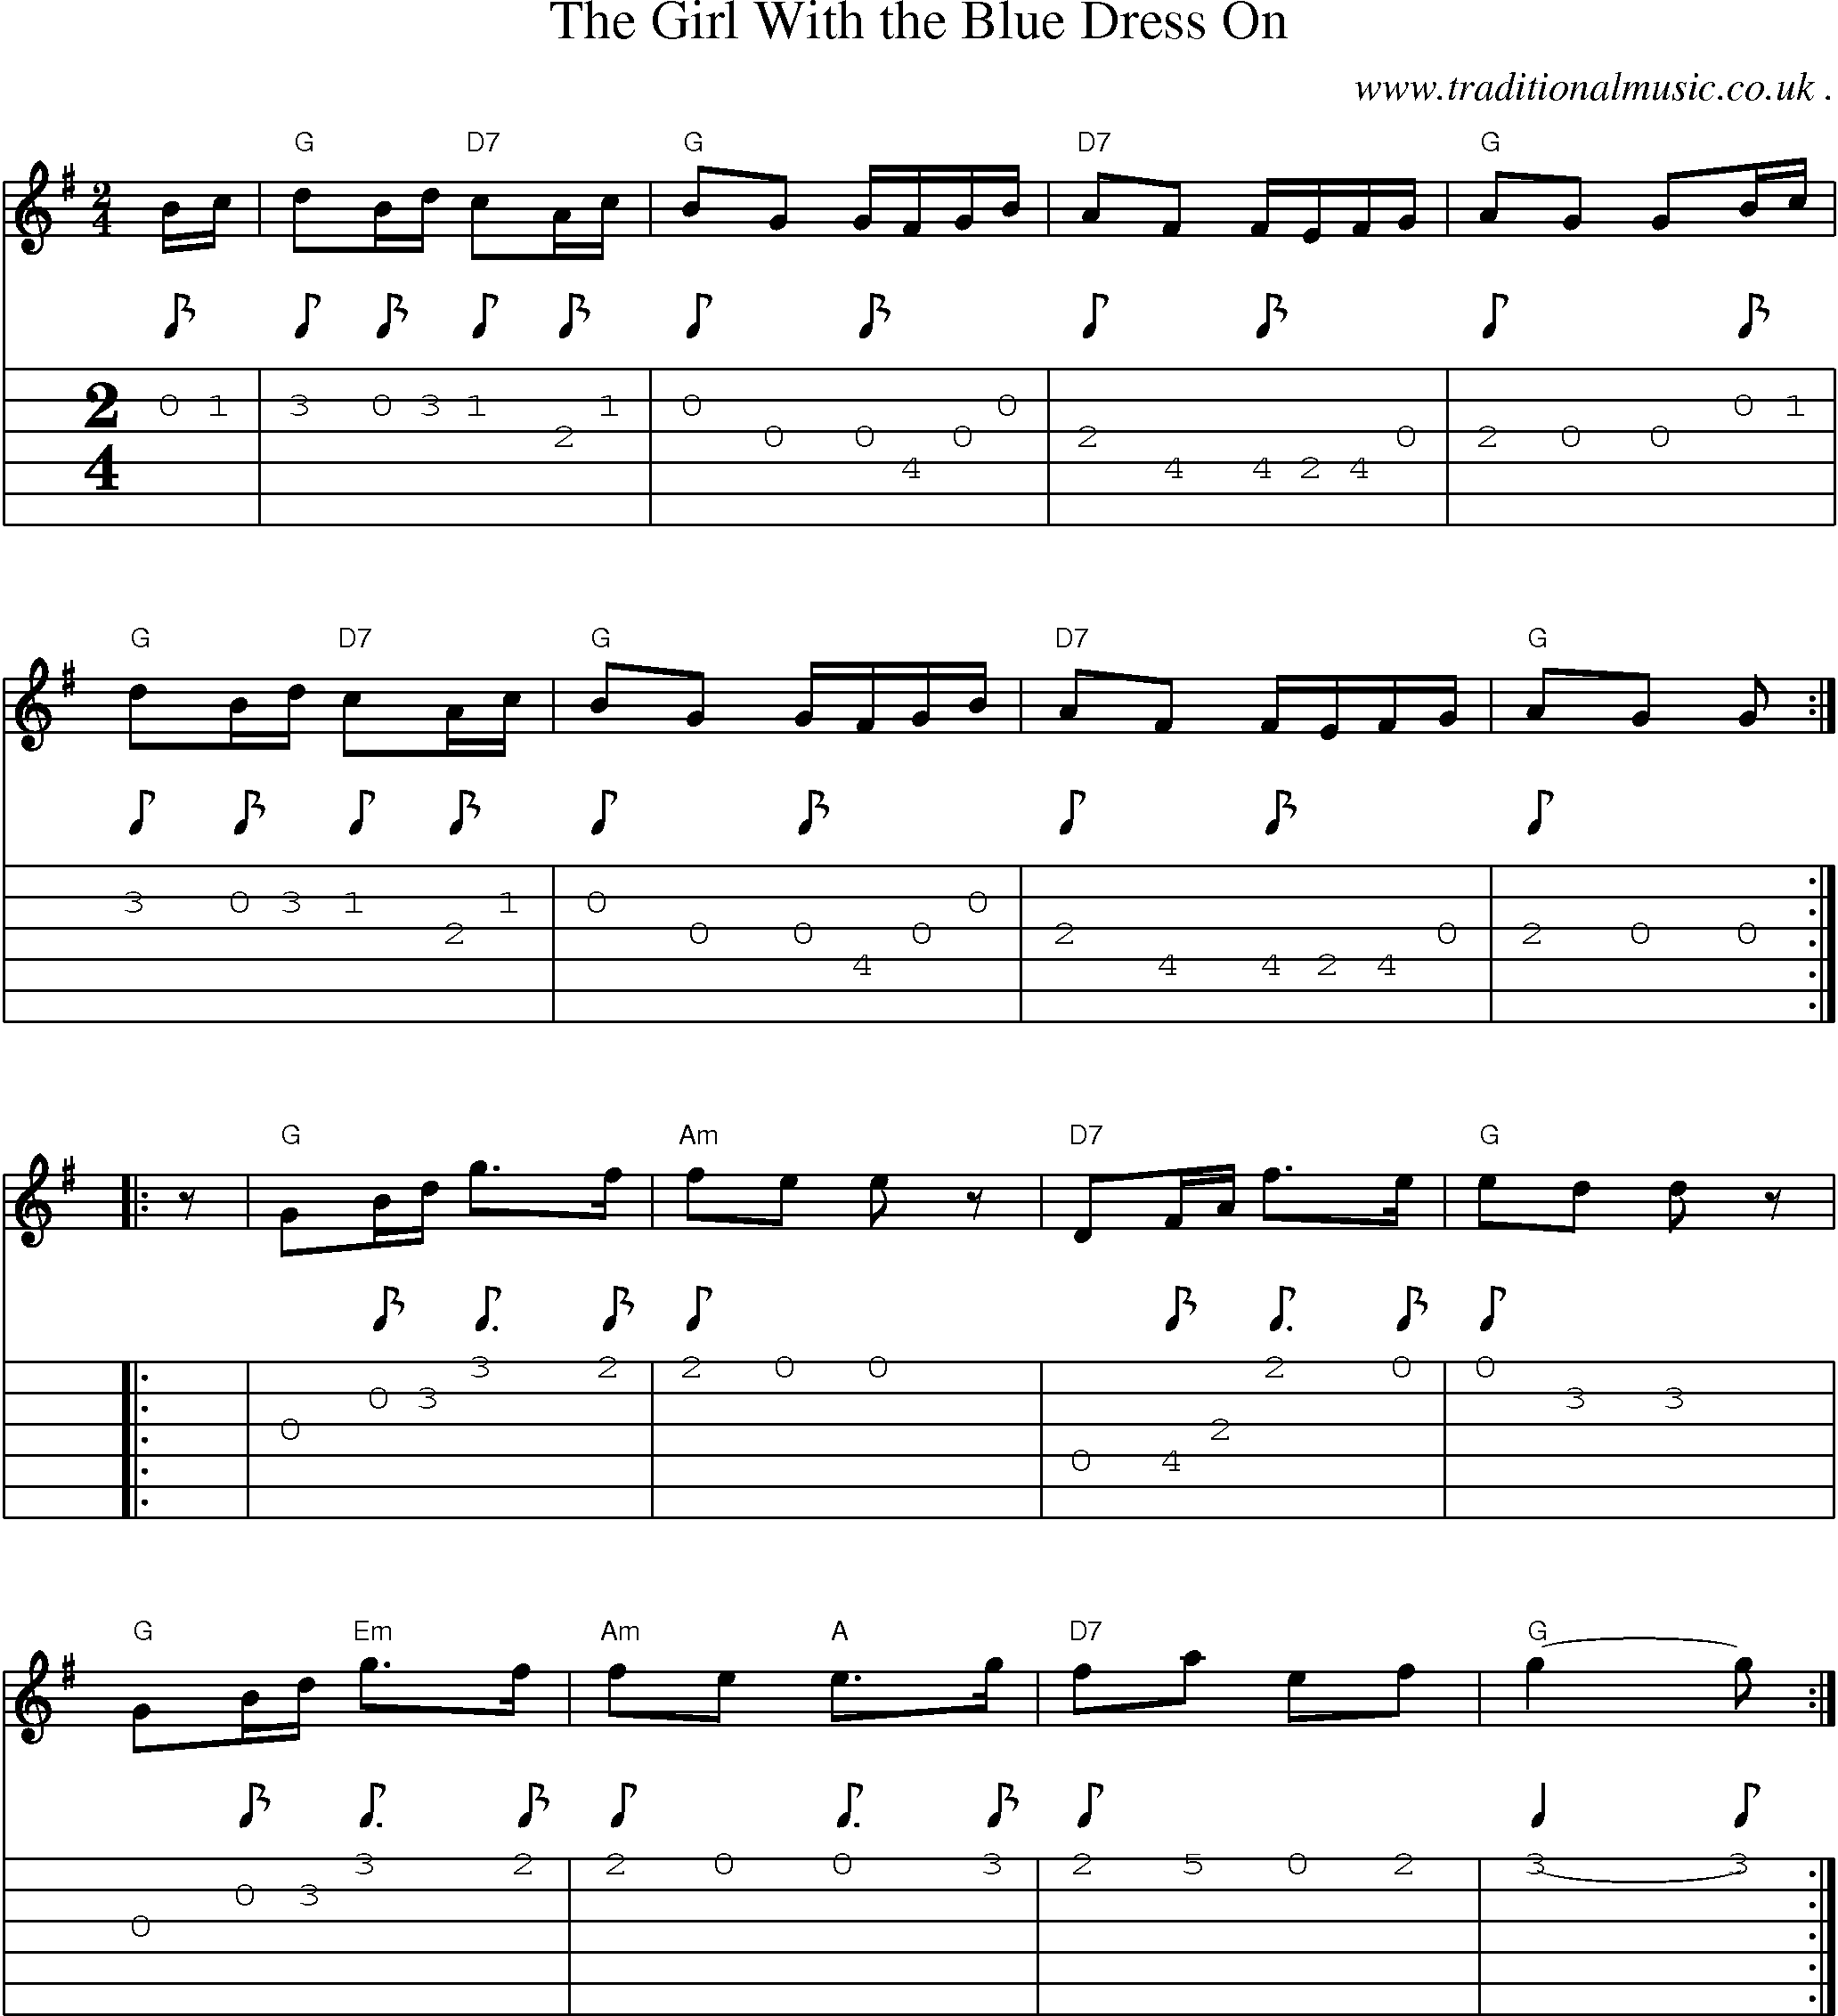 Music Score and Guitar Tabs for The Girl With The Blue Dress On